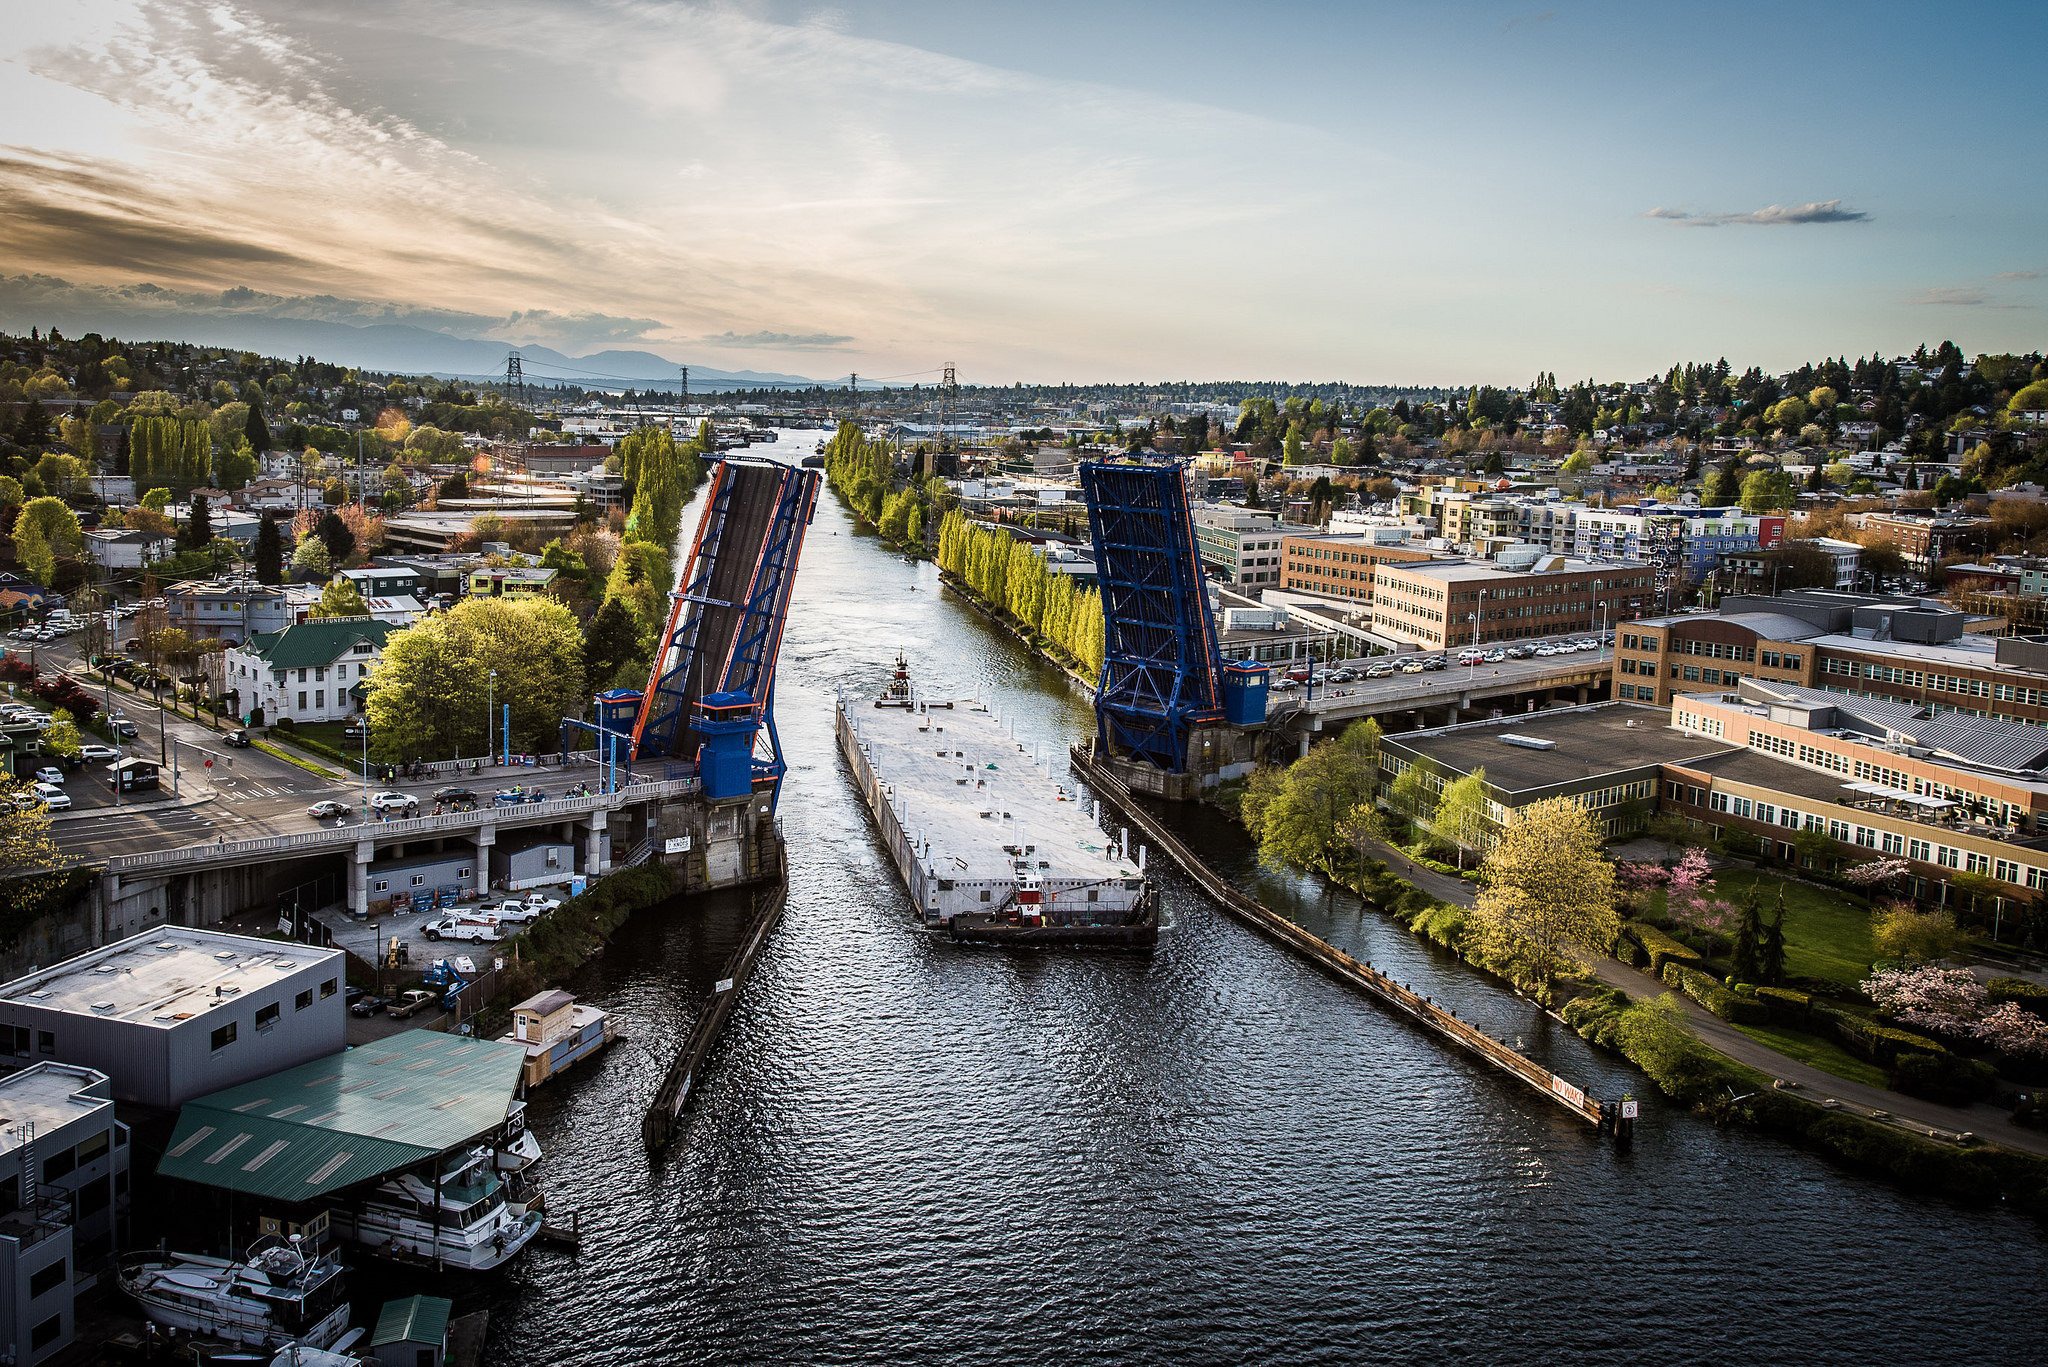 A pontoon from the old SR 520 bridge passes the Freemont Bridge in Seattle. Photo courtesy of WSDOT.